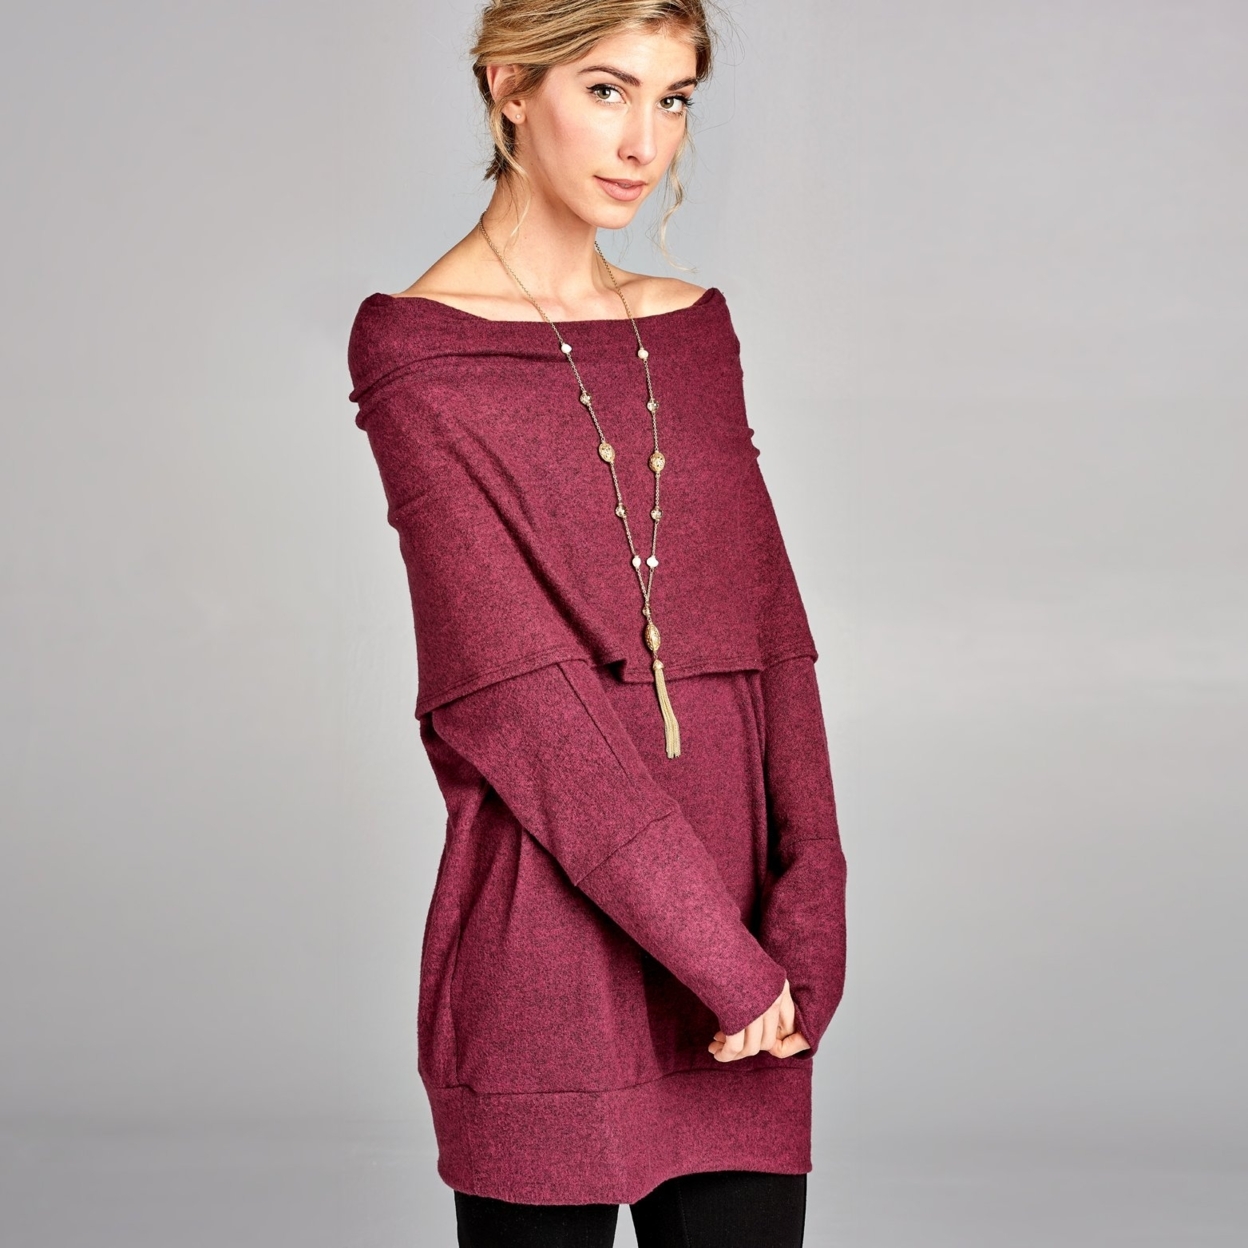 Oversized Cowl Neck Marled Sweater - Brown, Small (2-6)